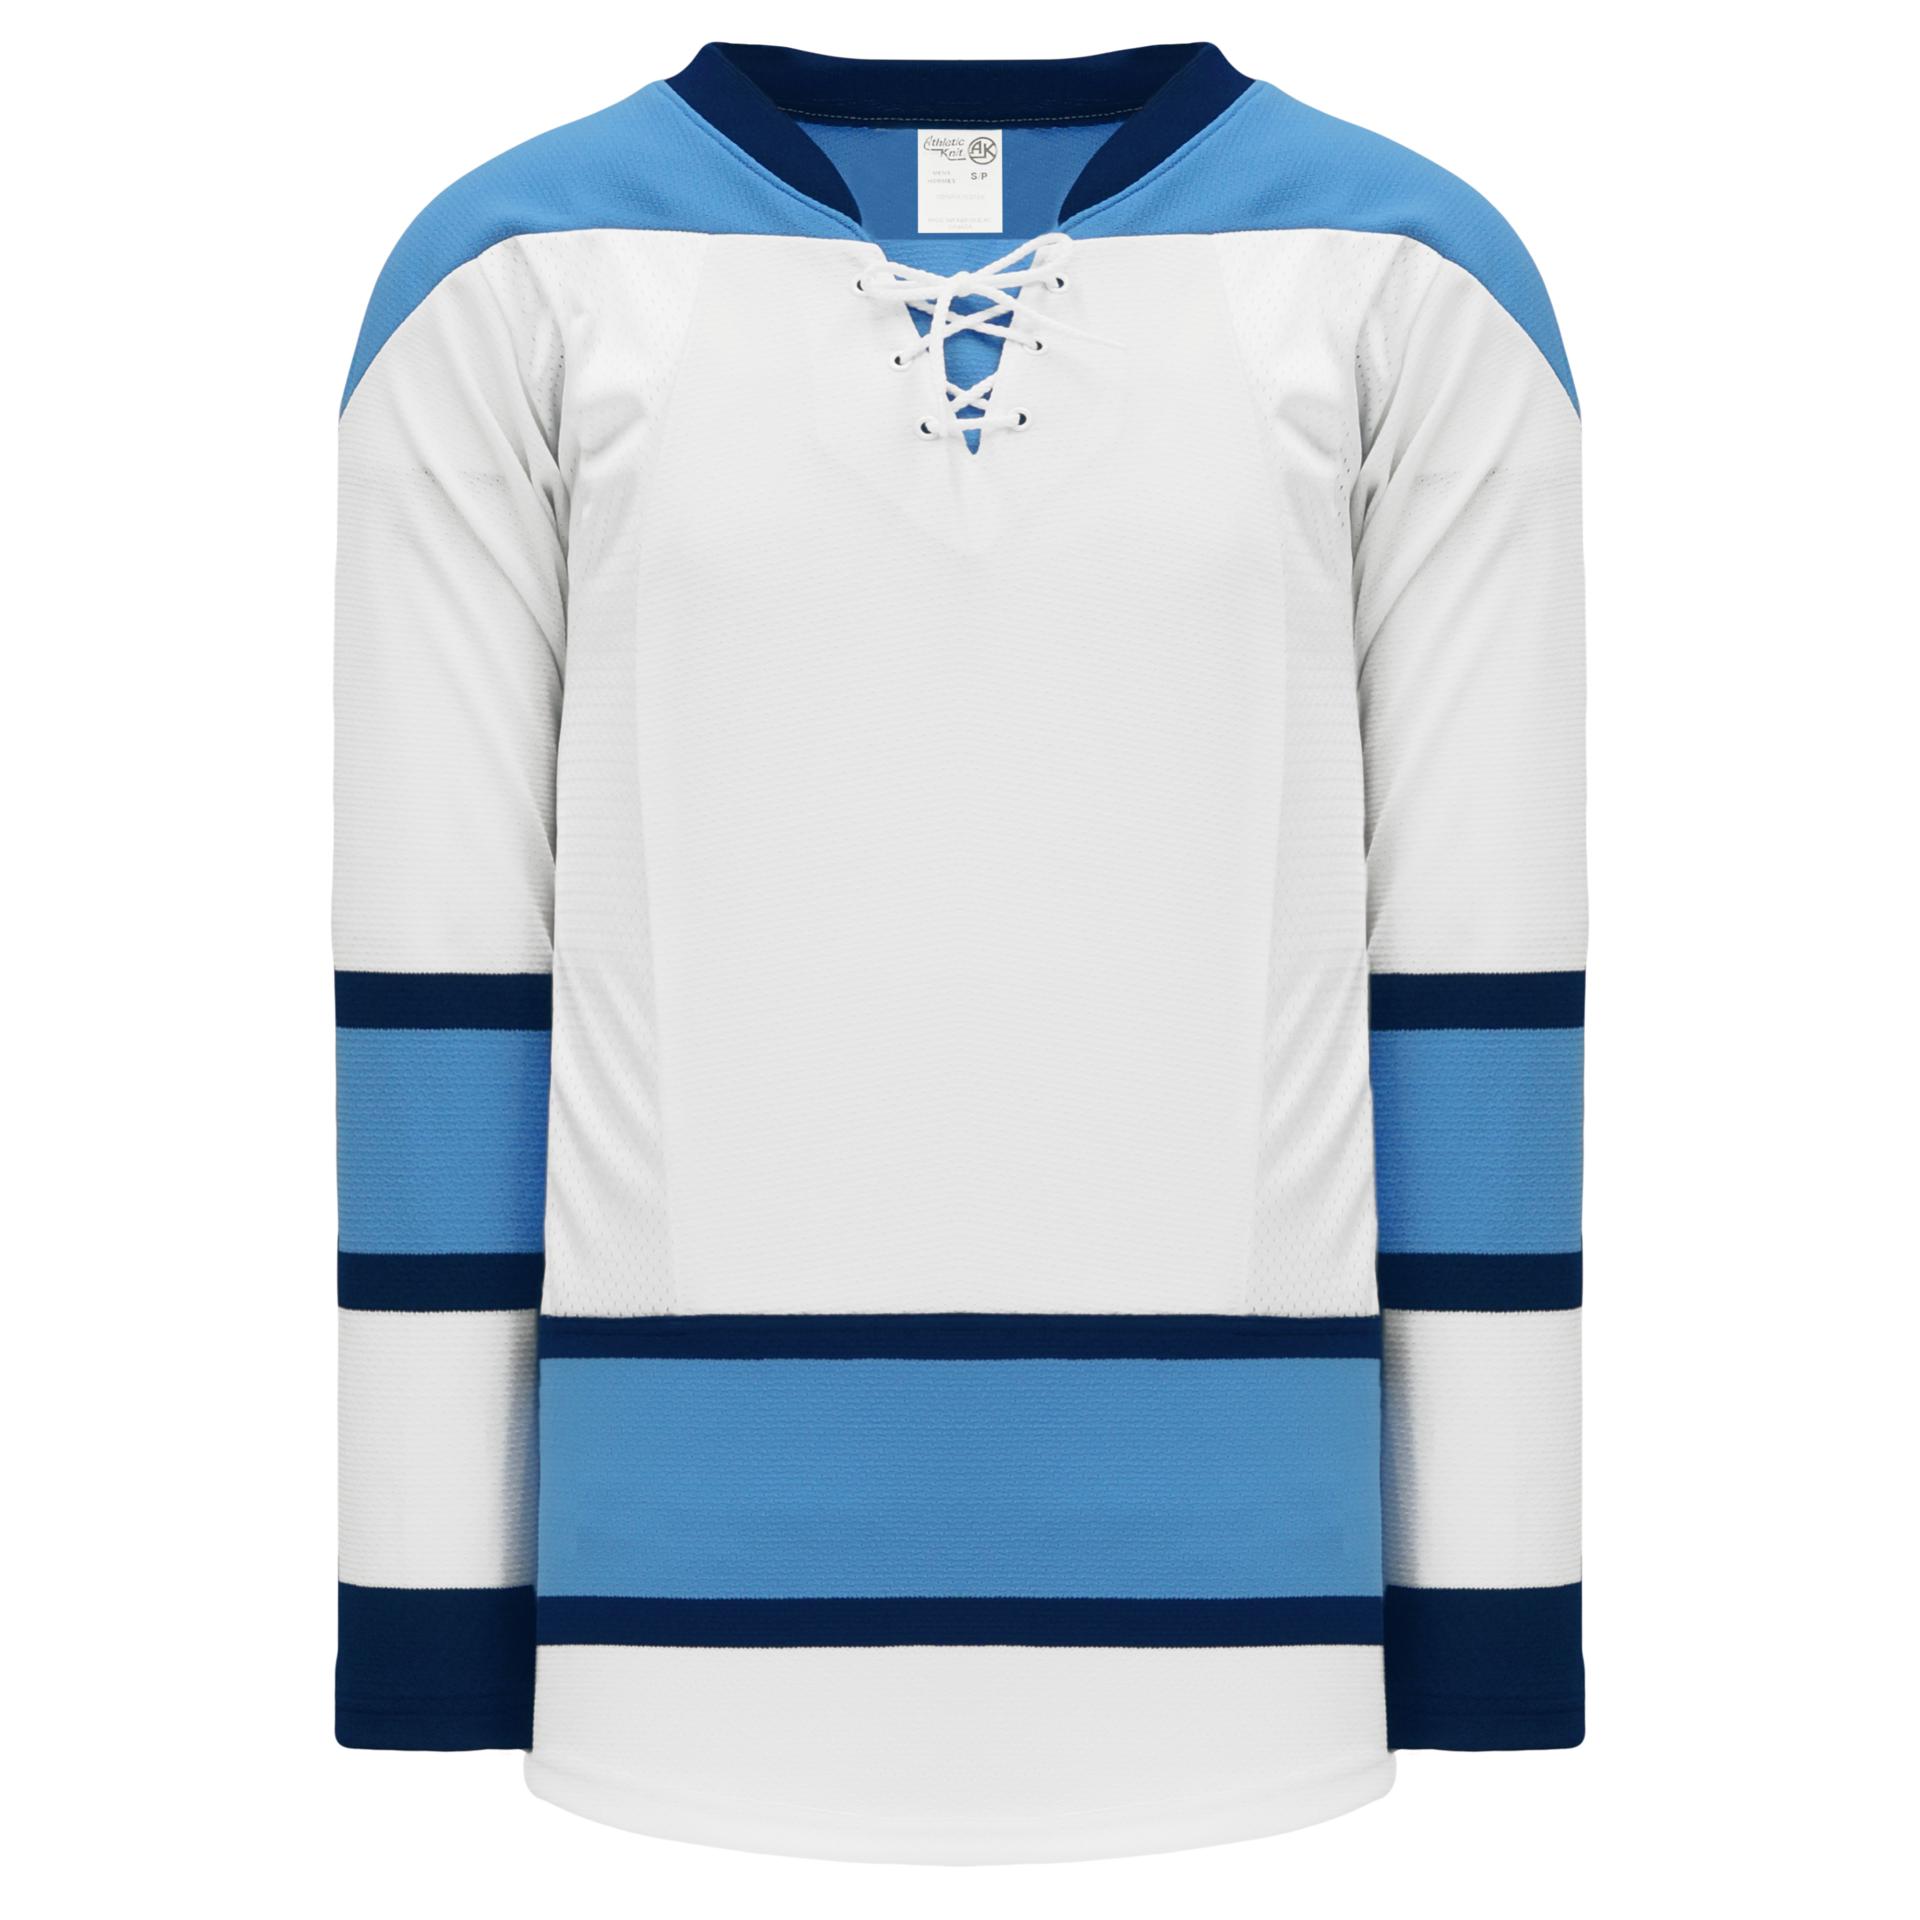 pittsburgh penguins blank jersey